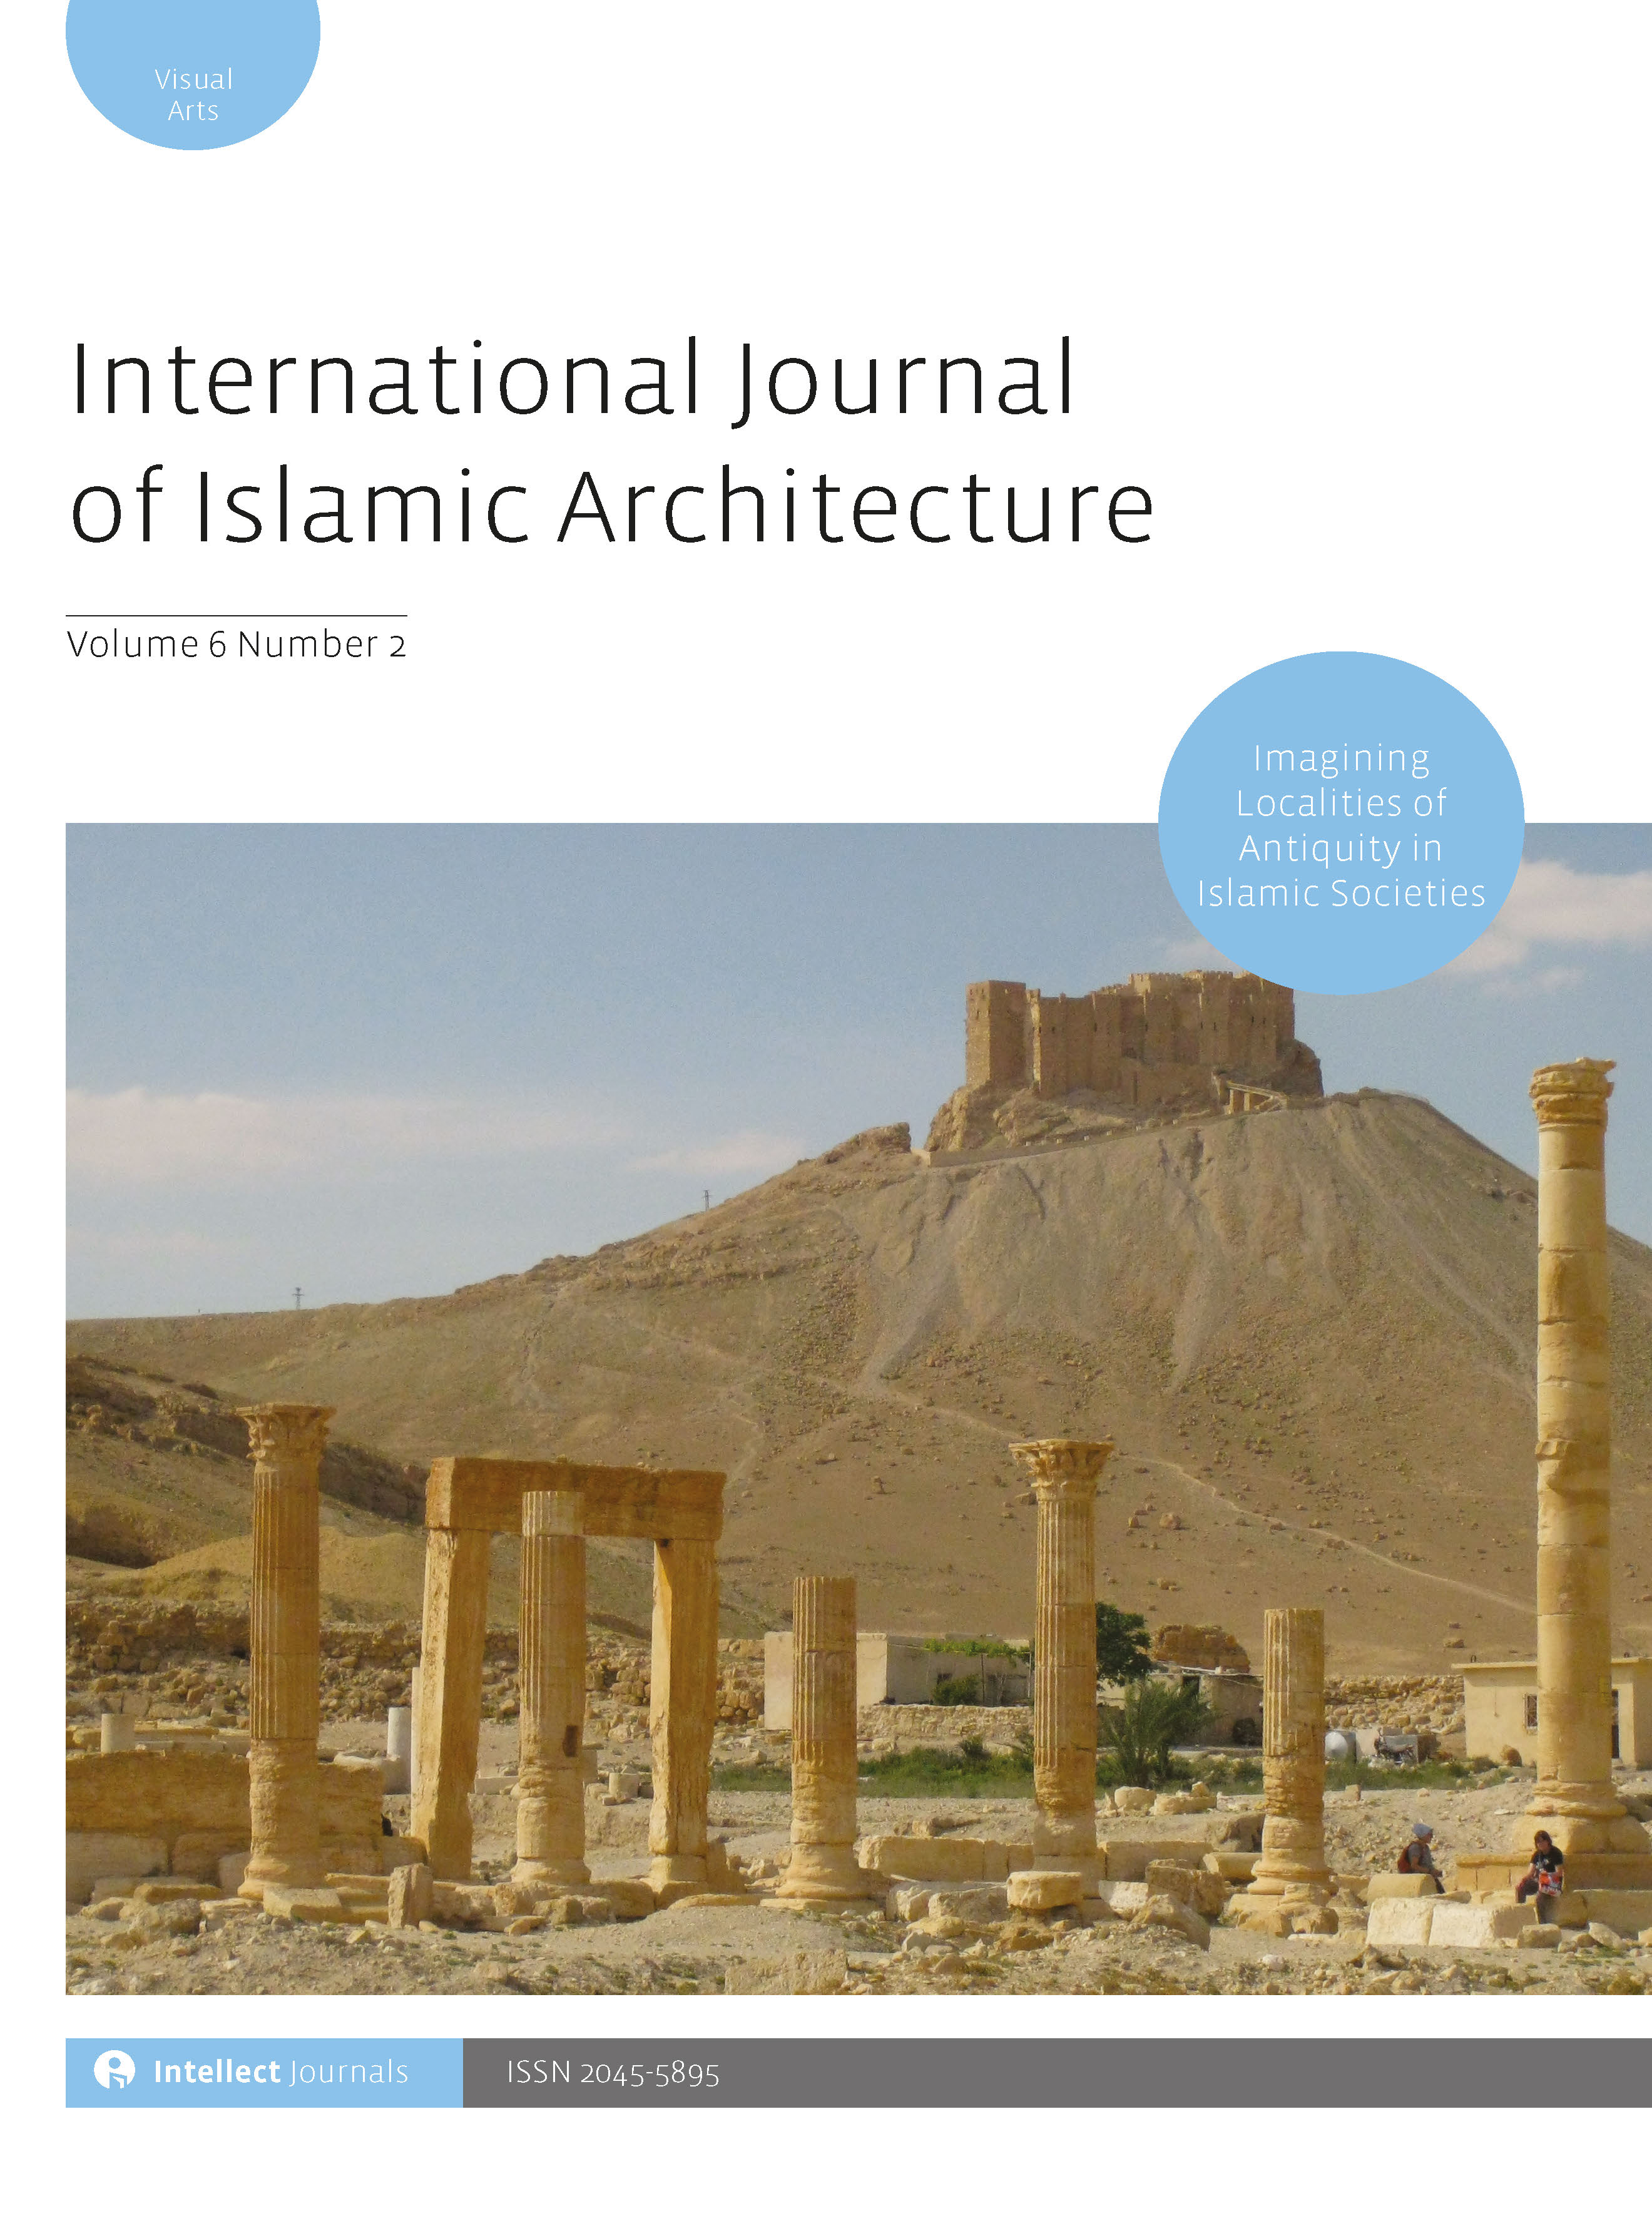 Stephennie Mulder - This article aims to conceptualize some of the varied ways Muslims have engaged with antiquity over time. Beginning with the example of Palmyra, it argues that the restoration of the Temple of Bel by the French archaeological team led by Henri Seyrig in the early twentieth century and the destruction of that same temple by ISIS in 2015 are both ideological acts oriented toward reviving an imagined and idealized past. While ISIS erased the remains of the ancient site recreated by the French, the French had previously erased 1,800 years of Christian and Muslim heritage at Palmyra. Both actions are the outcome of the logic inherent in globalized, cosmopolitan heritage ideals. As a means of moving beyond the problematic discourse of the globalized heritage model in which certain heritage values are ‘authorized’ and others are not, the article then proposes an initial conceptualization of imaginings of heritage in Islamic societies over time, suggesting a range of diverse ways Muslims have valued and continue to value ancient localities, and introduces the articles contained in this special issue.<div><br></div><div>Keywords: ISIS;&nbsp;Islamic heritage;&nbsp;Palmyra;&nbsp;antiquity;&nbsp;cultural heritage;&nbsp;‘aja’ib</div>